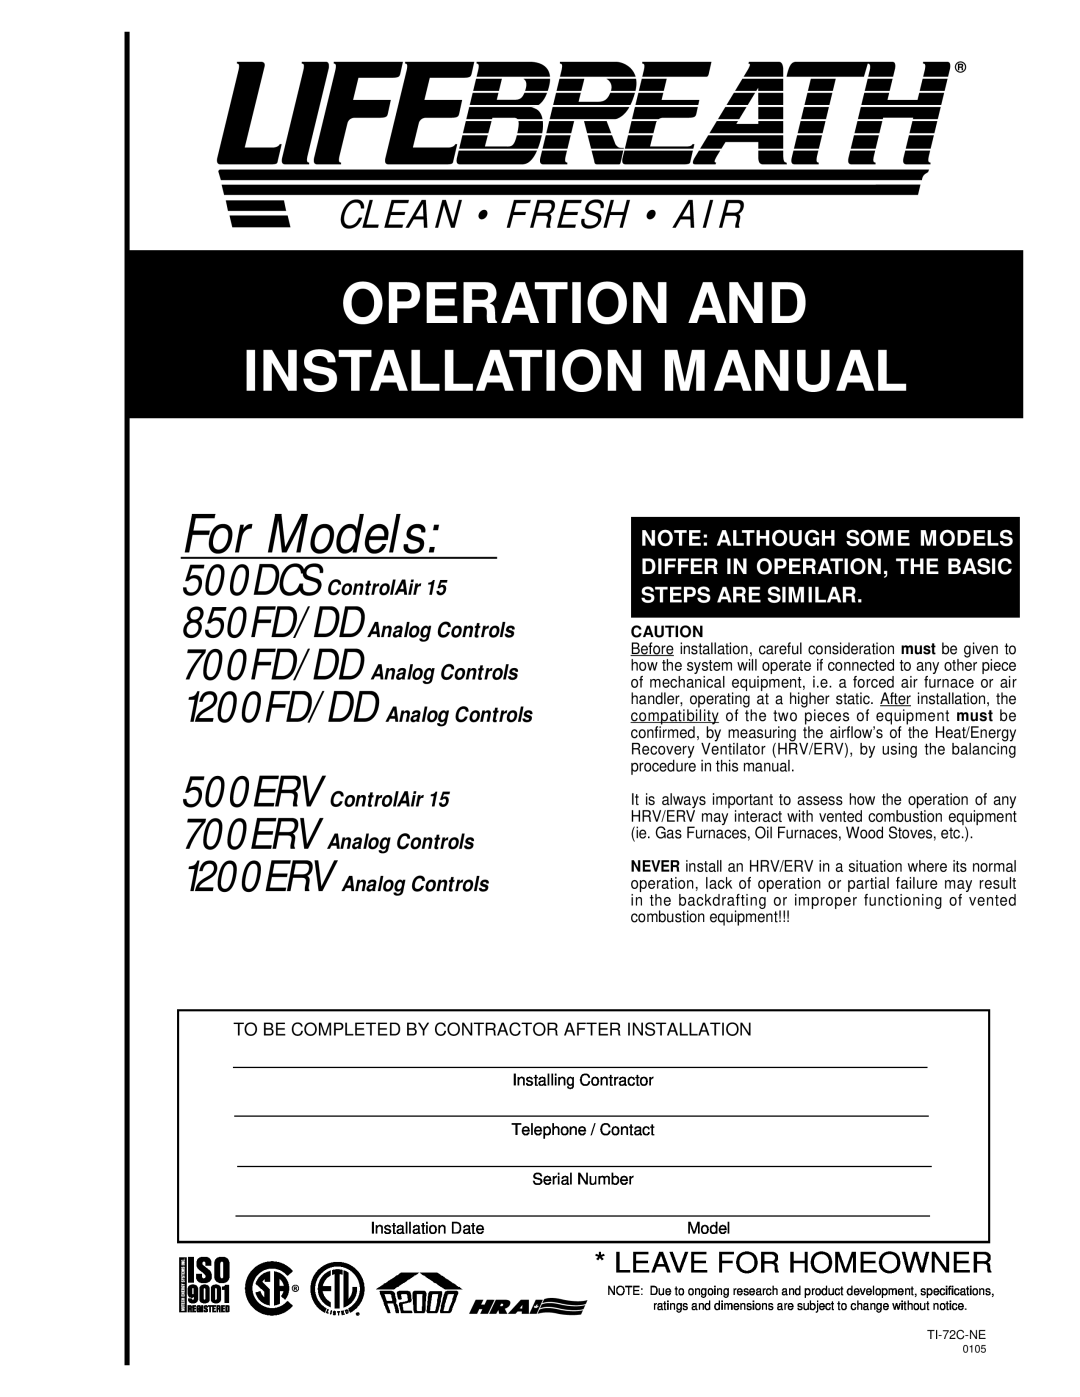 Lifebreath 500ERV specifications For Models, Clean • Fresh • Air, Operation And Installation Manual, Leave For Homeowner 